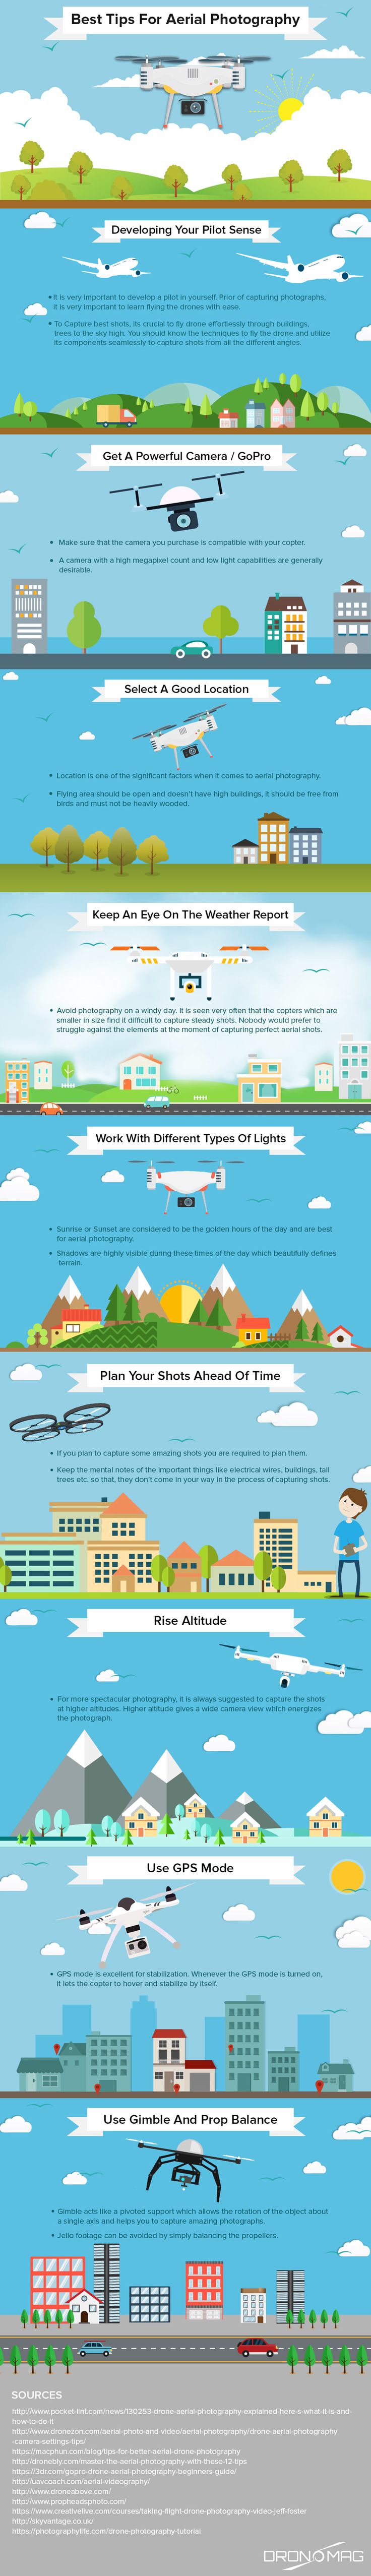 Tips for Using Drone for Aerial Photography Infographic. Topic: camera, gadget